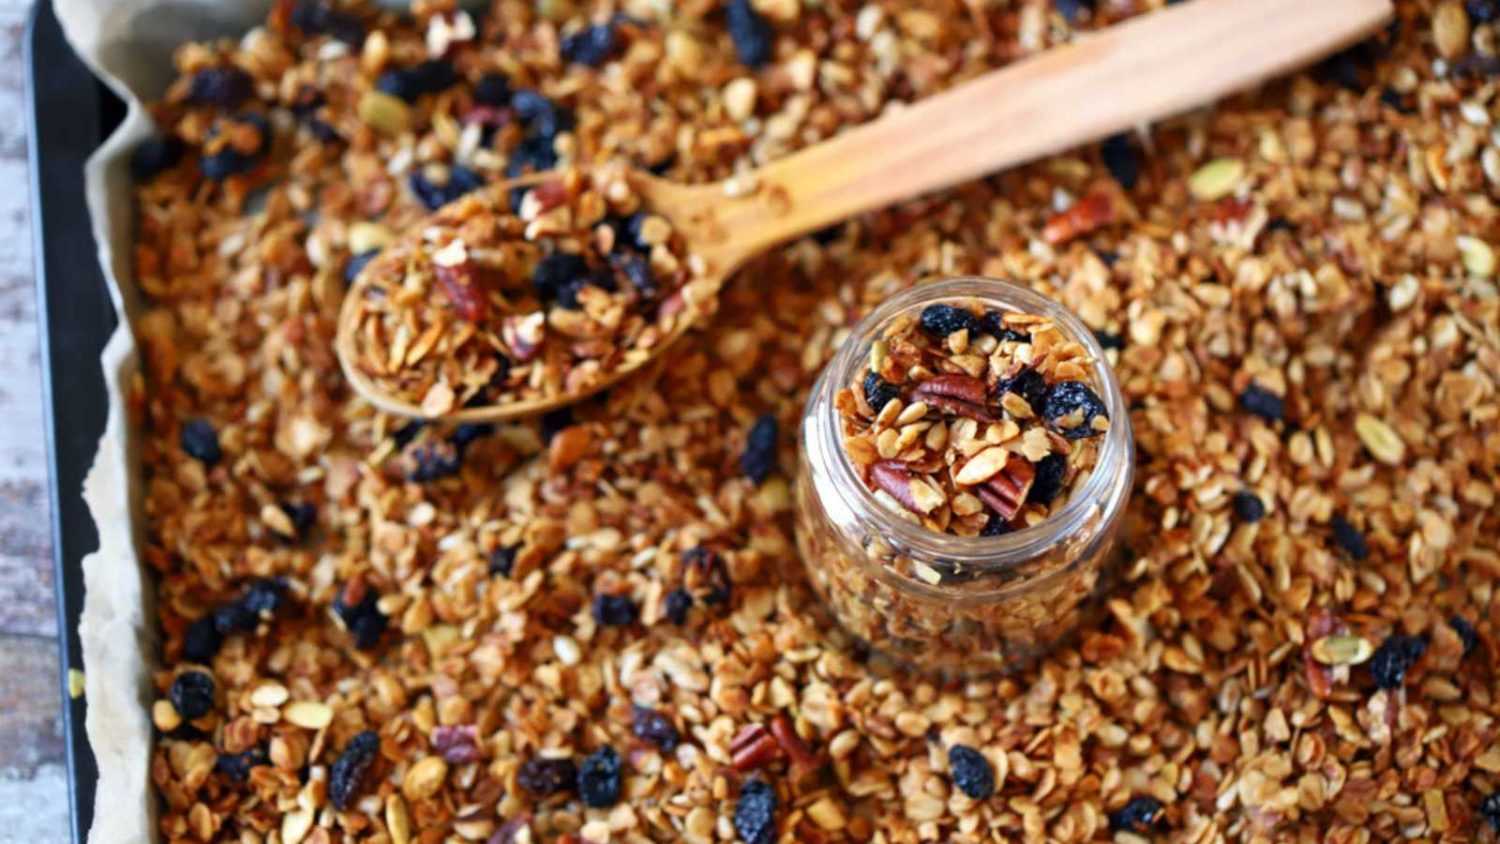 Freshly made homemade granola on a baking sheet. Granola in a wooden spoon and in a jar. Selective focus. Healthy diet concept. Keto diet.